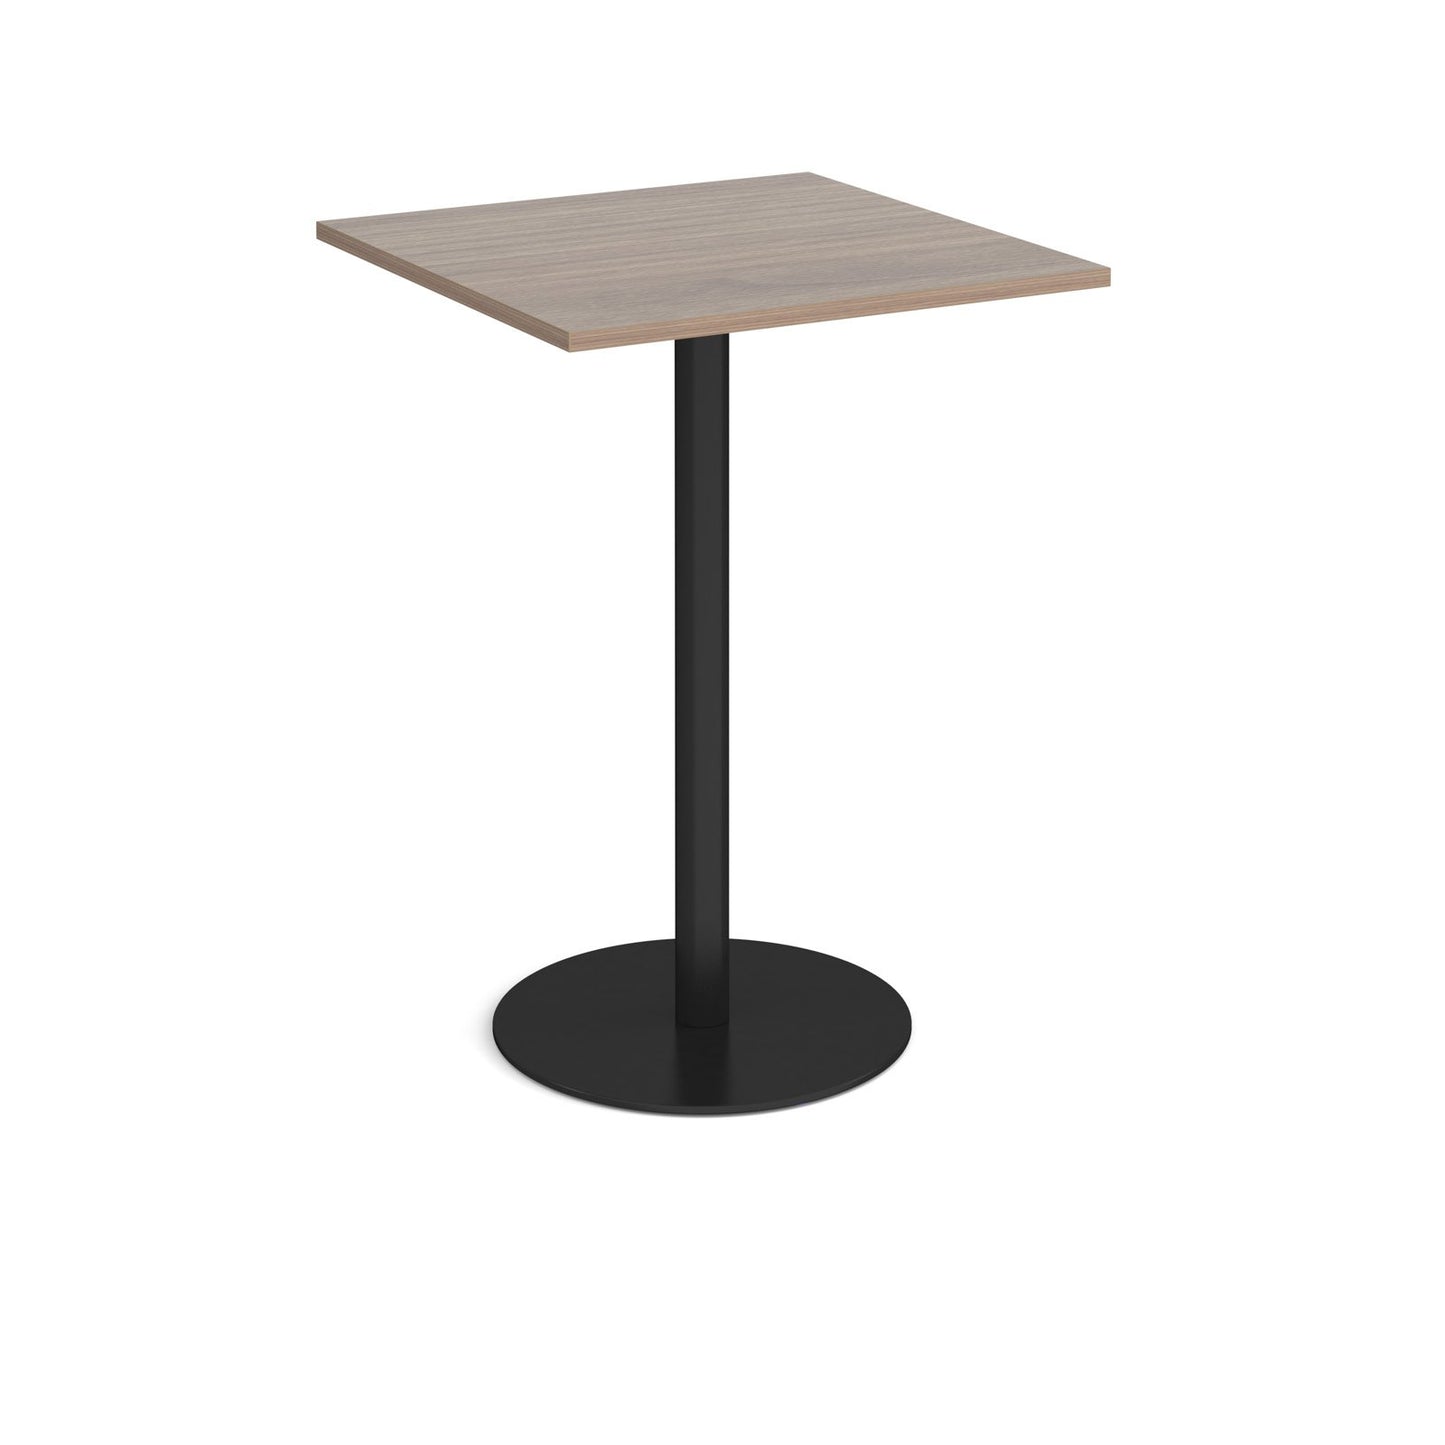 Monza square poseur table with flat round base